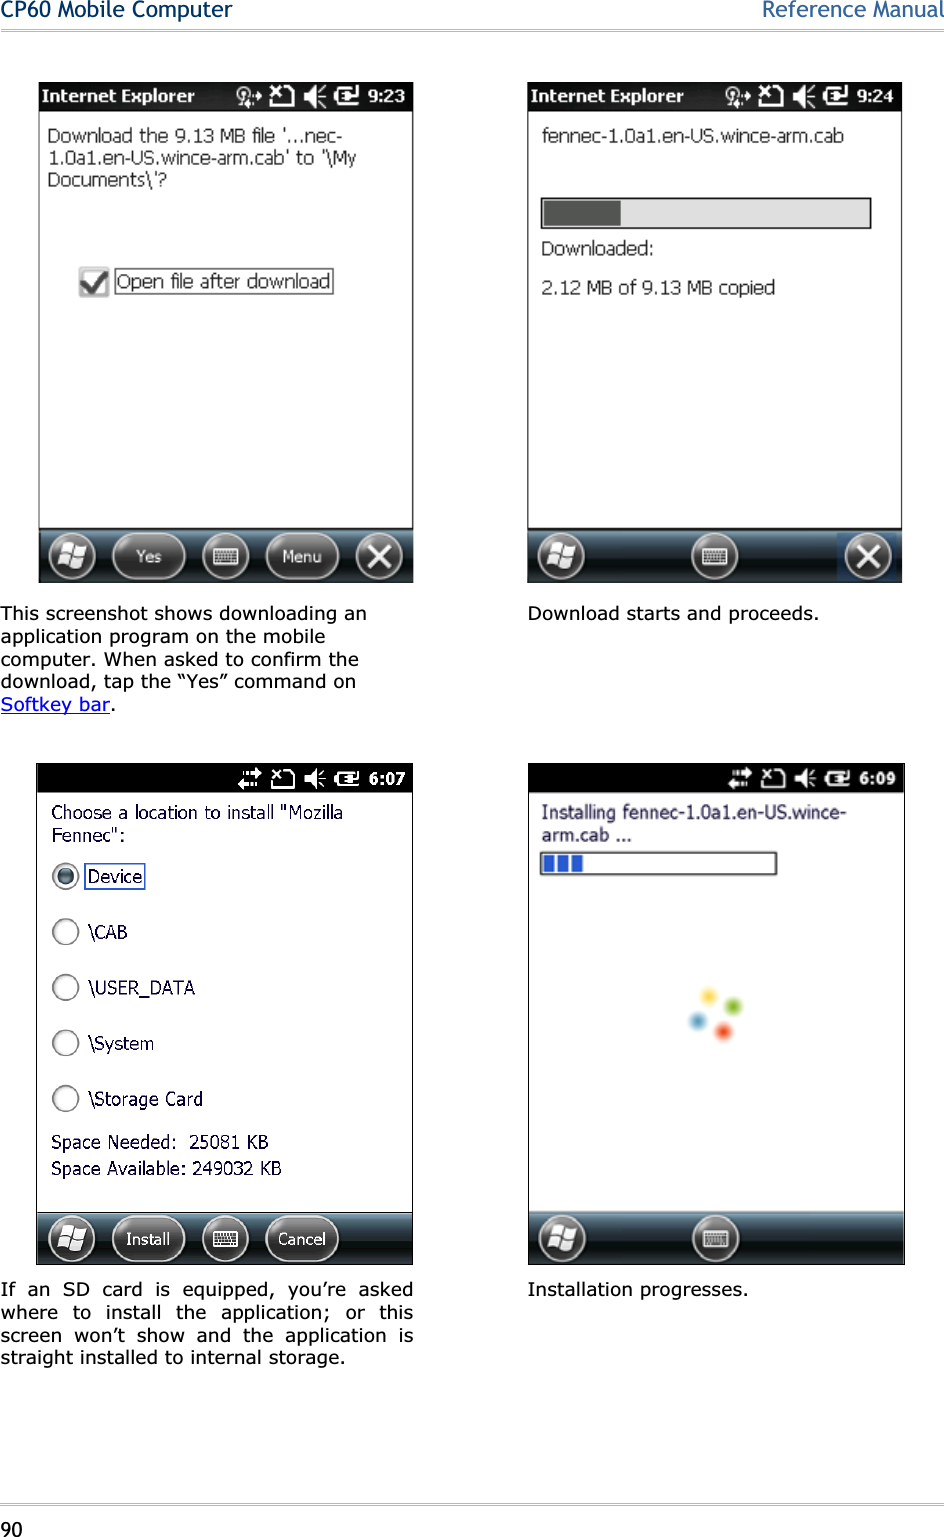 90CP60 Mobile Computer Reference ManualThis screenshot shows downloading an application program on the mobile computer. When asked to confirm the download, tap the “Yes” command on Softkey bar.  Download starts and proceeds.    If an SD card is equipped, you’re asked where to install the application; or this screen won’t show and the application is straight installed to internal storage.  Installation progresses. 